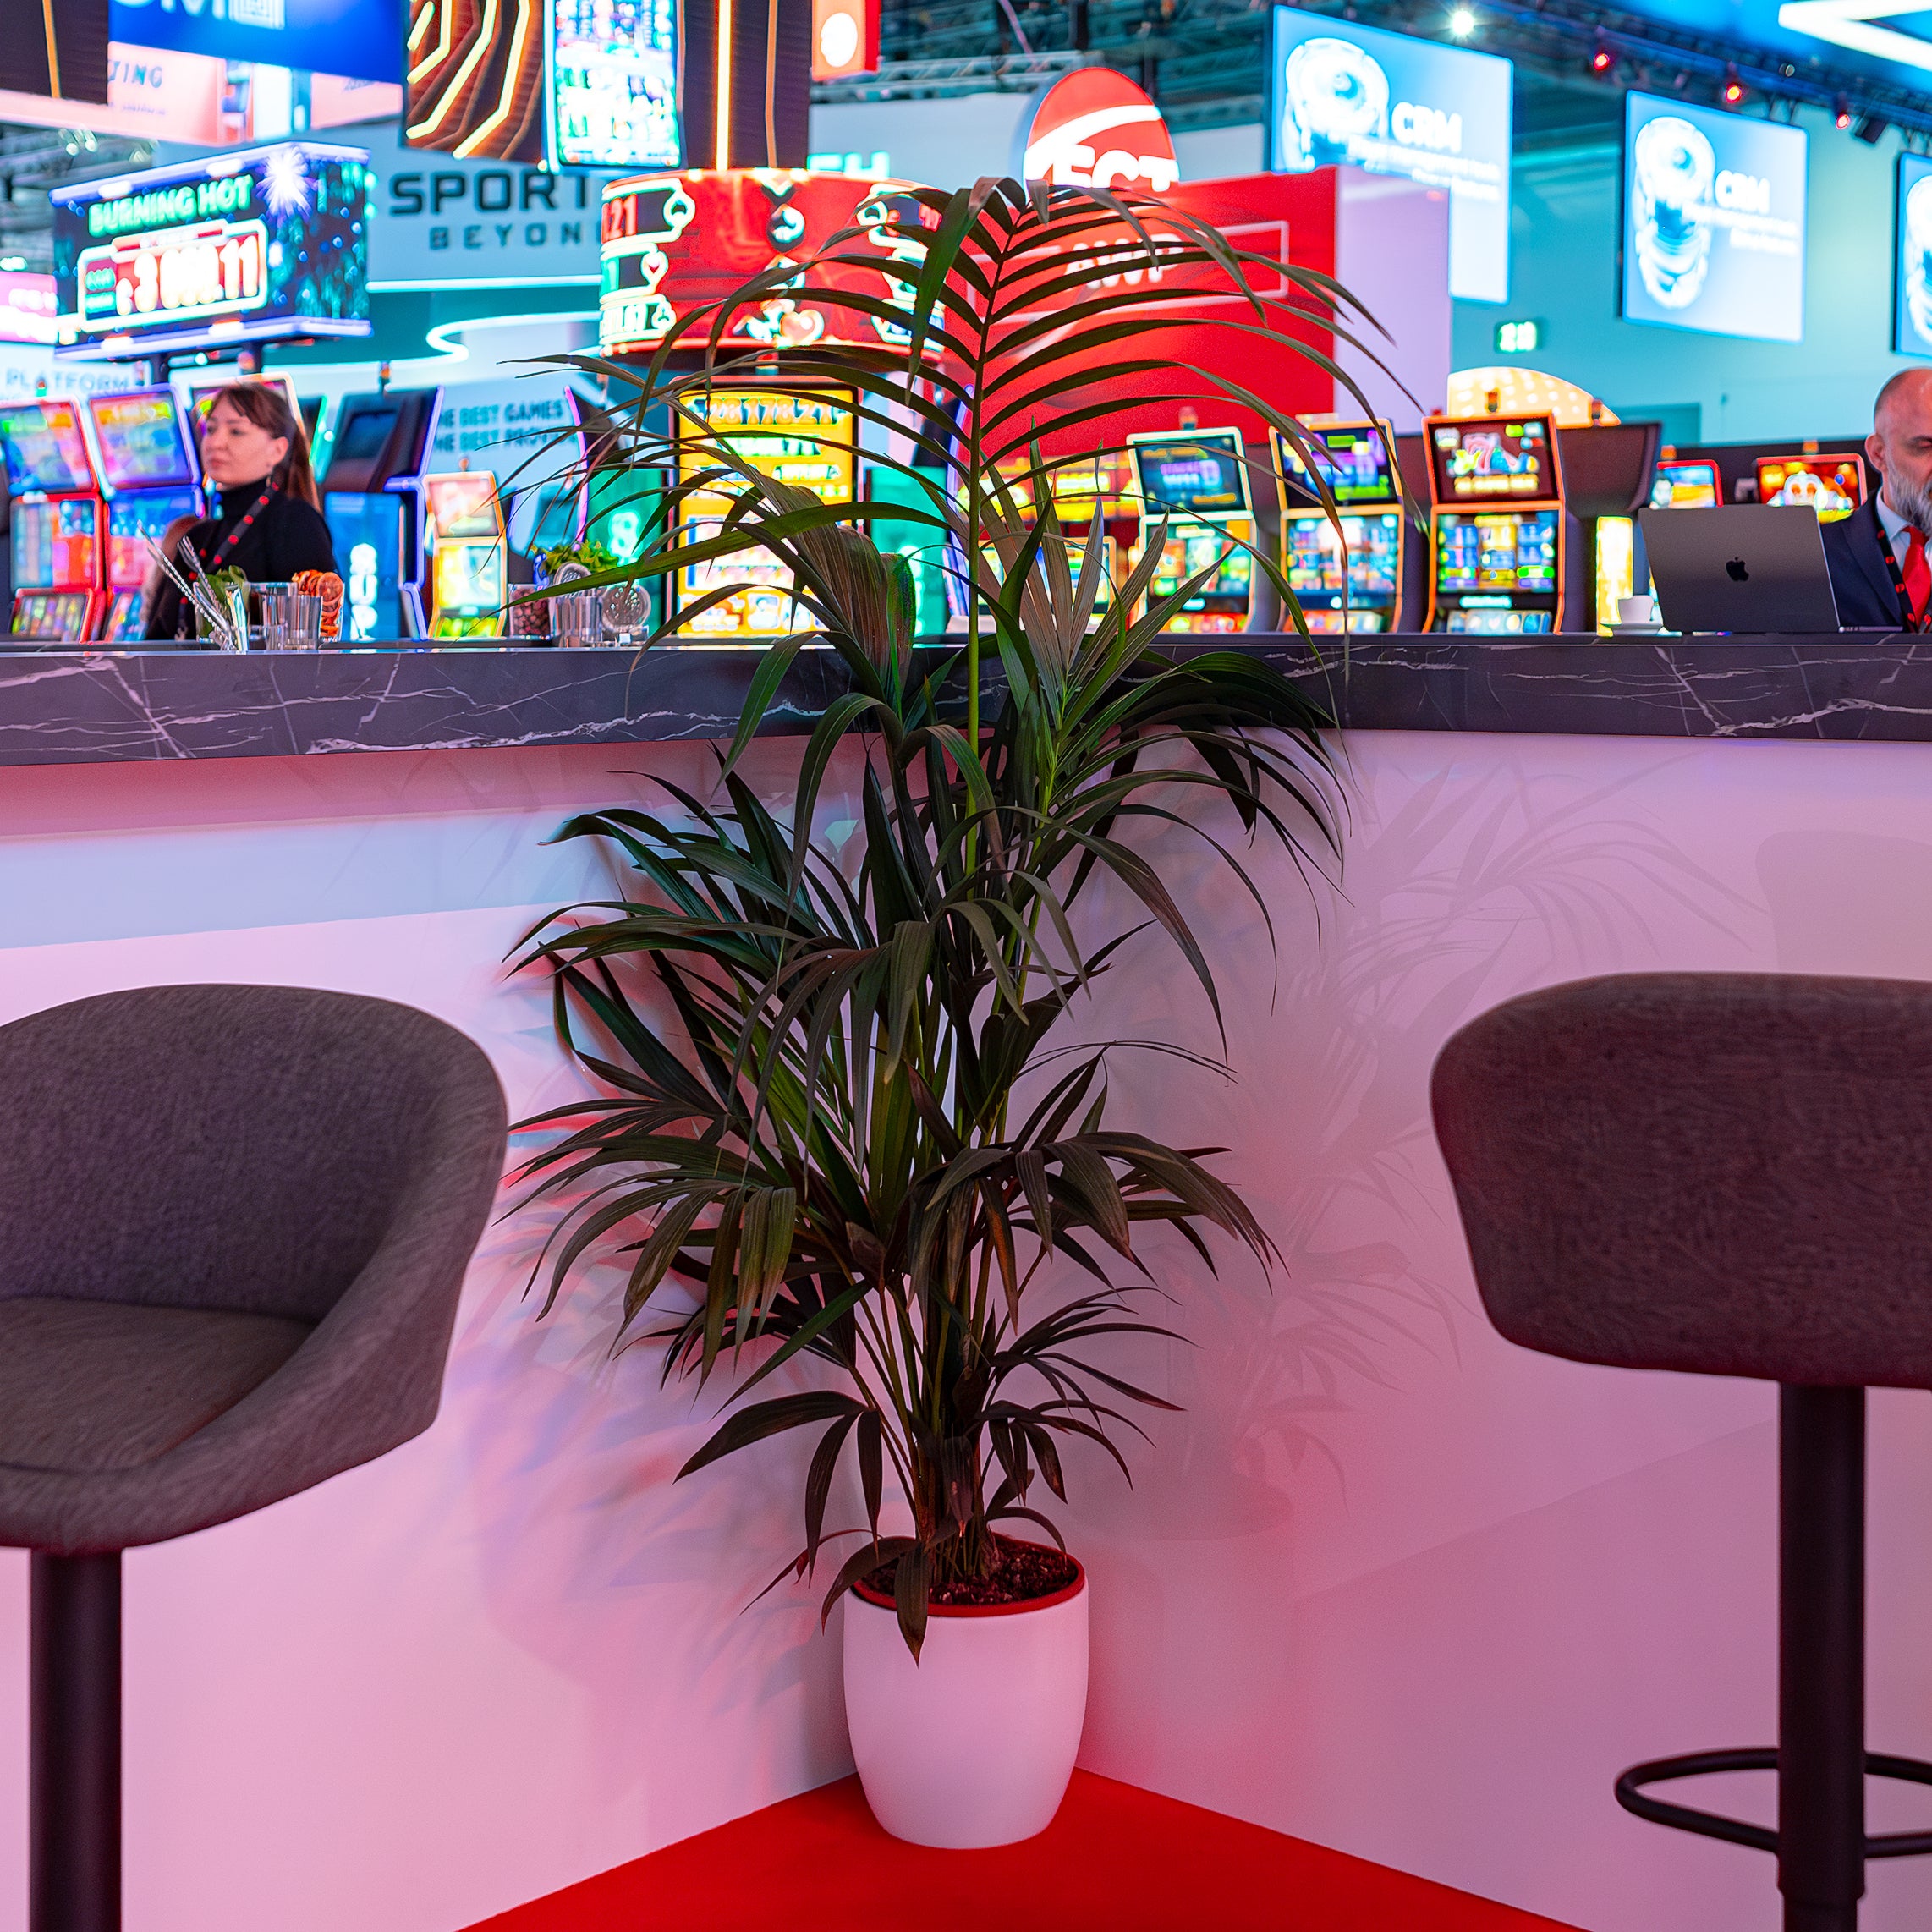 A lush, green potted plant for hire adds a touch of tranquillity to the busy gaming floor at ICE London Exhibition, contrasting with the bright lights and colourful slot machine displays in the background.